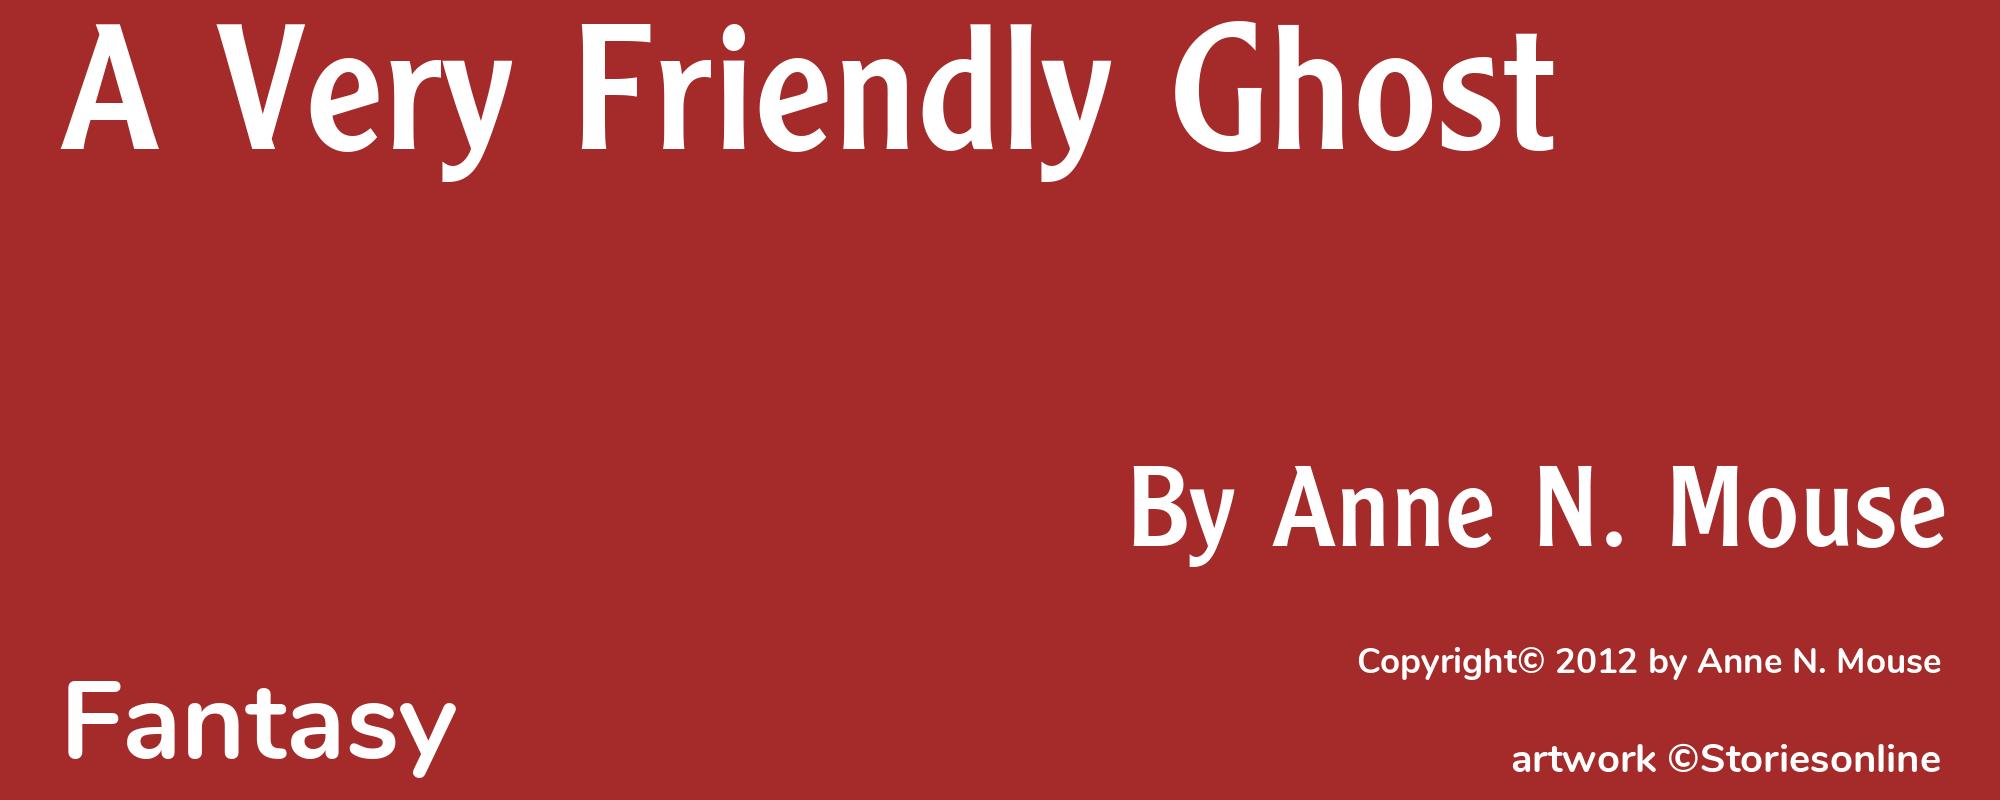 A Very Friendly Ghost - Cover